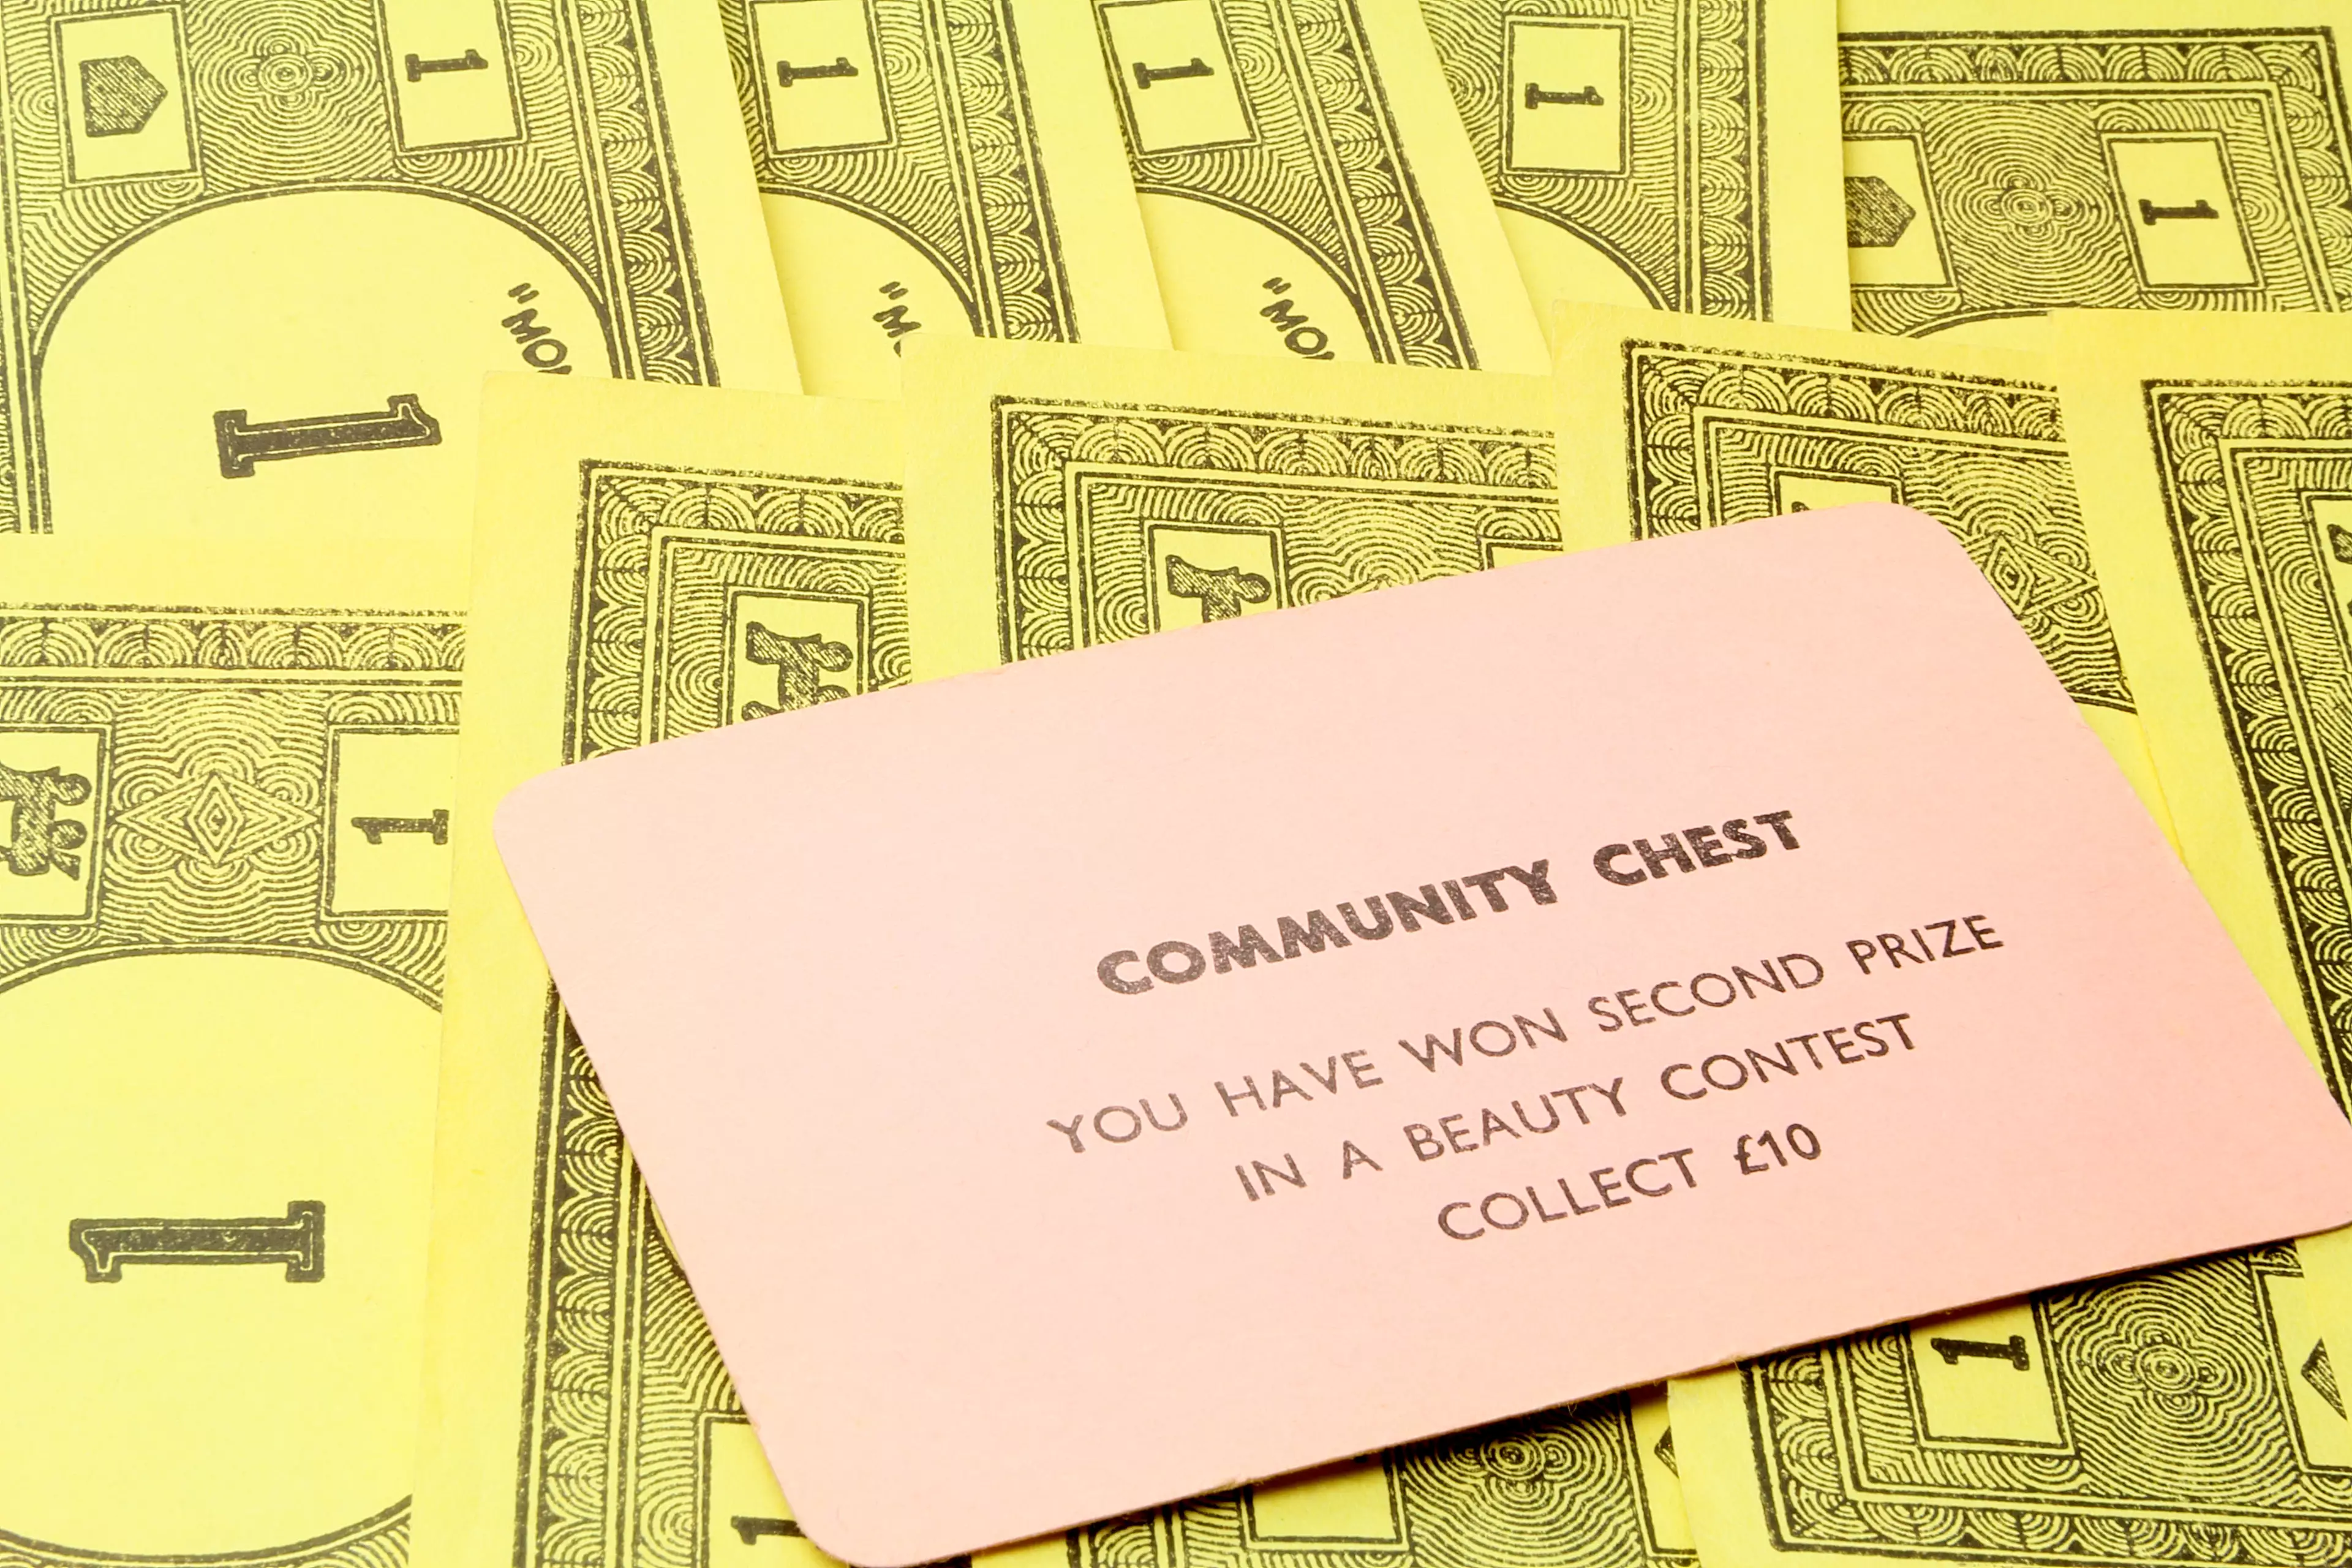 One of the original Community Chest cards.